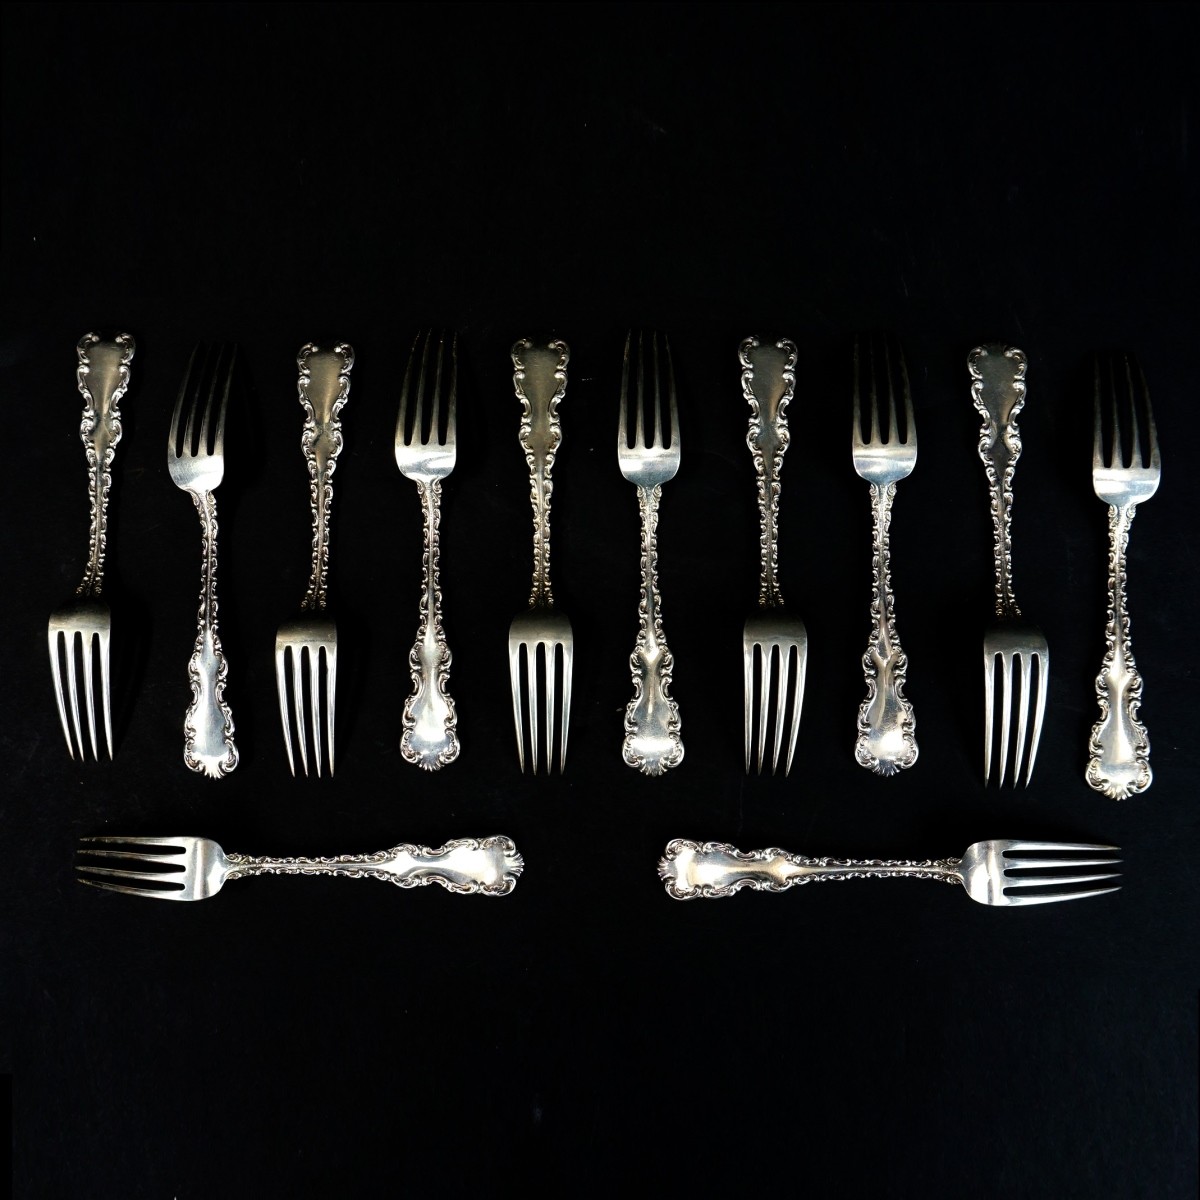 Whiting Manufacturing Co Forks